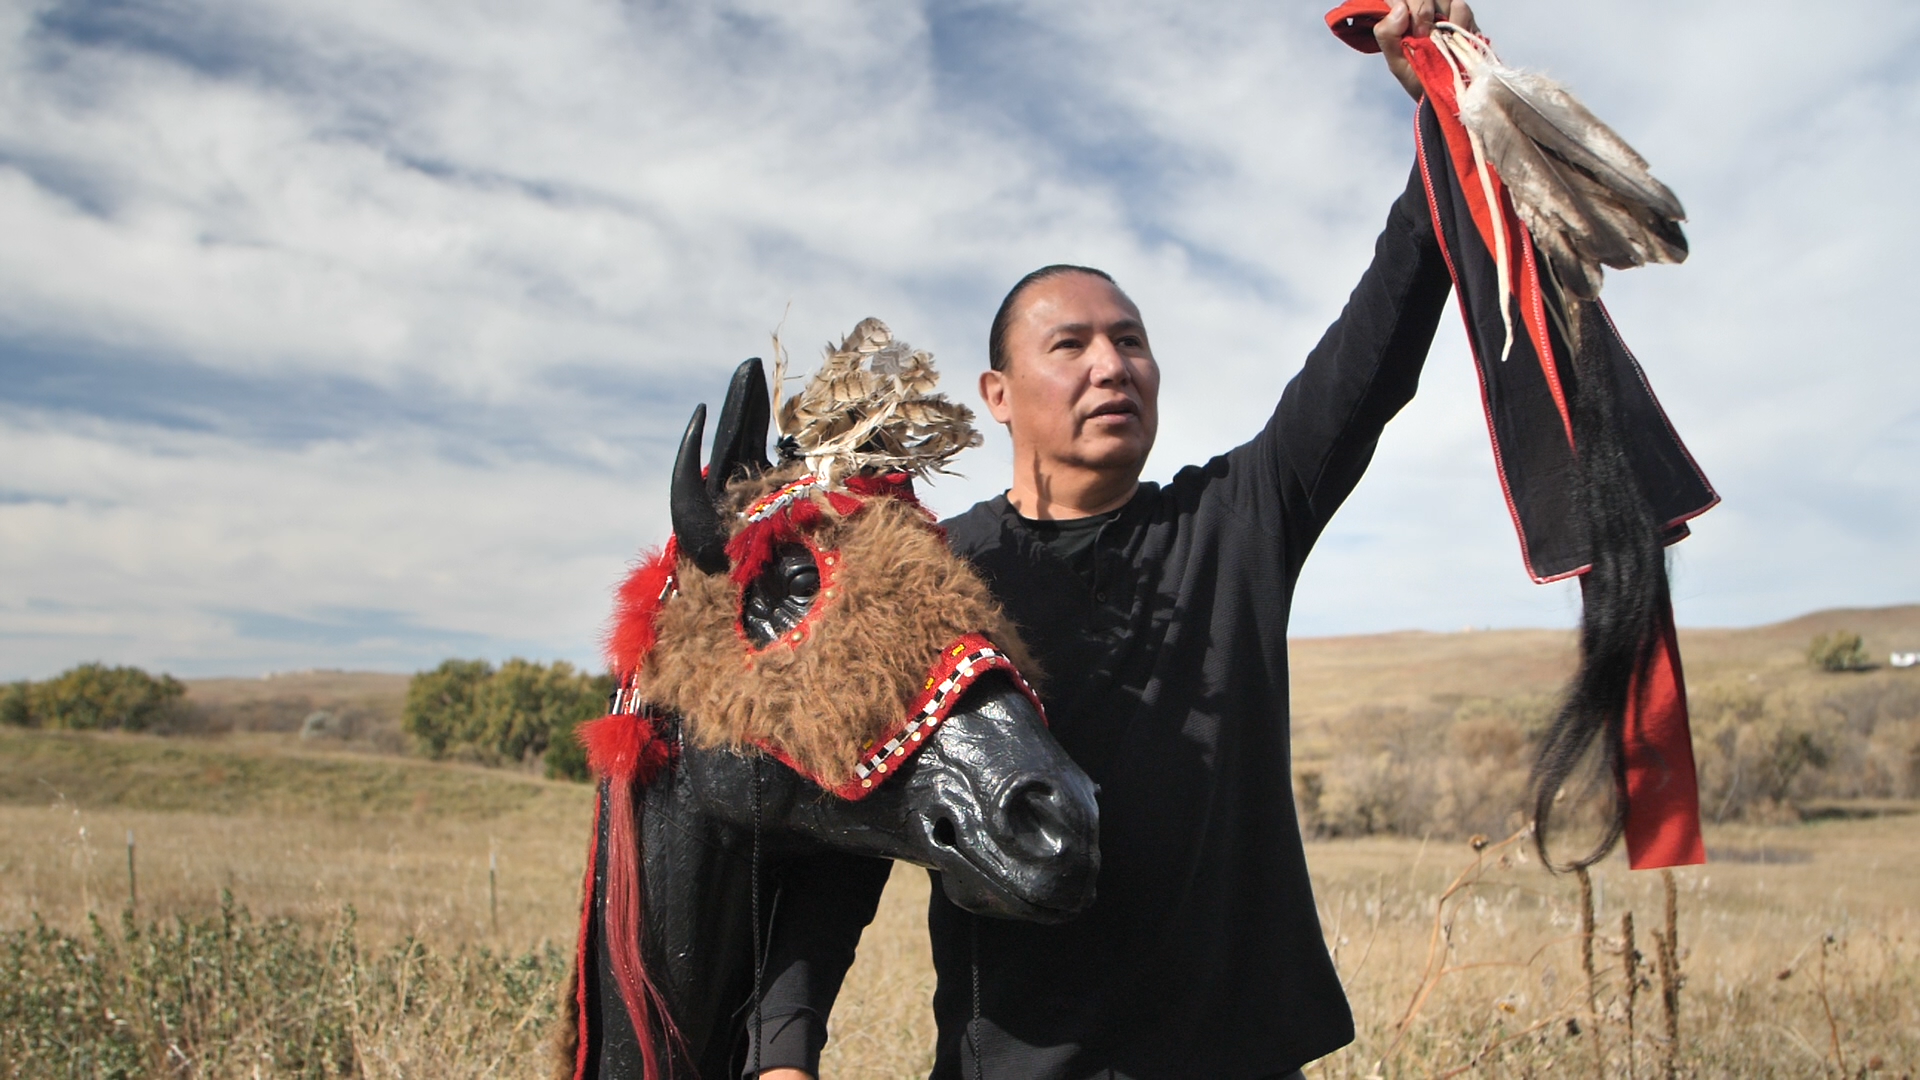 Explores the sacred relationship between horses and the Dakota people